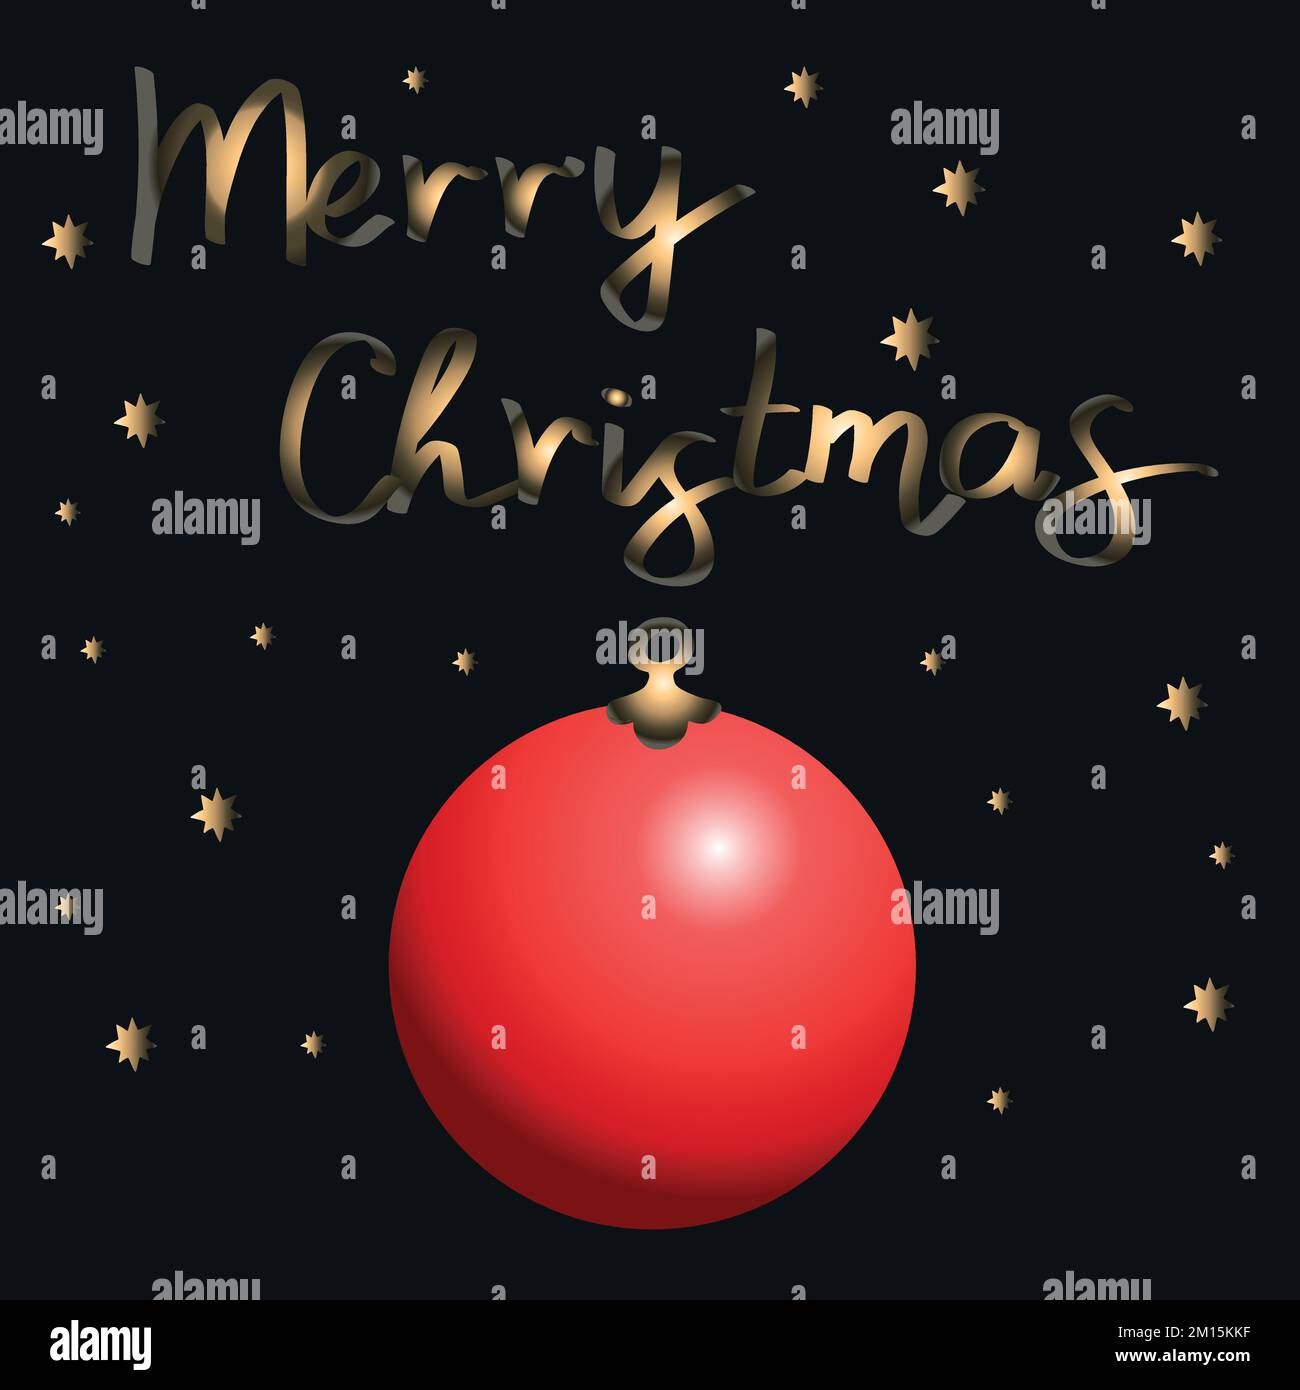 Red christmas ball on black background and handwriting Merry Christmas. Hand drawn art. Gold colored lettering Stock Vector